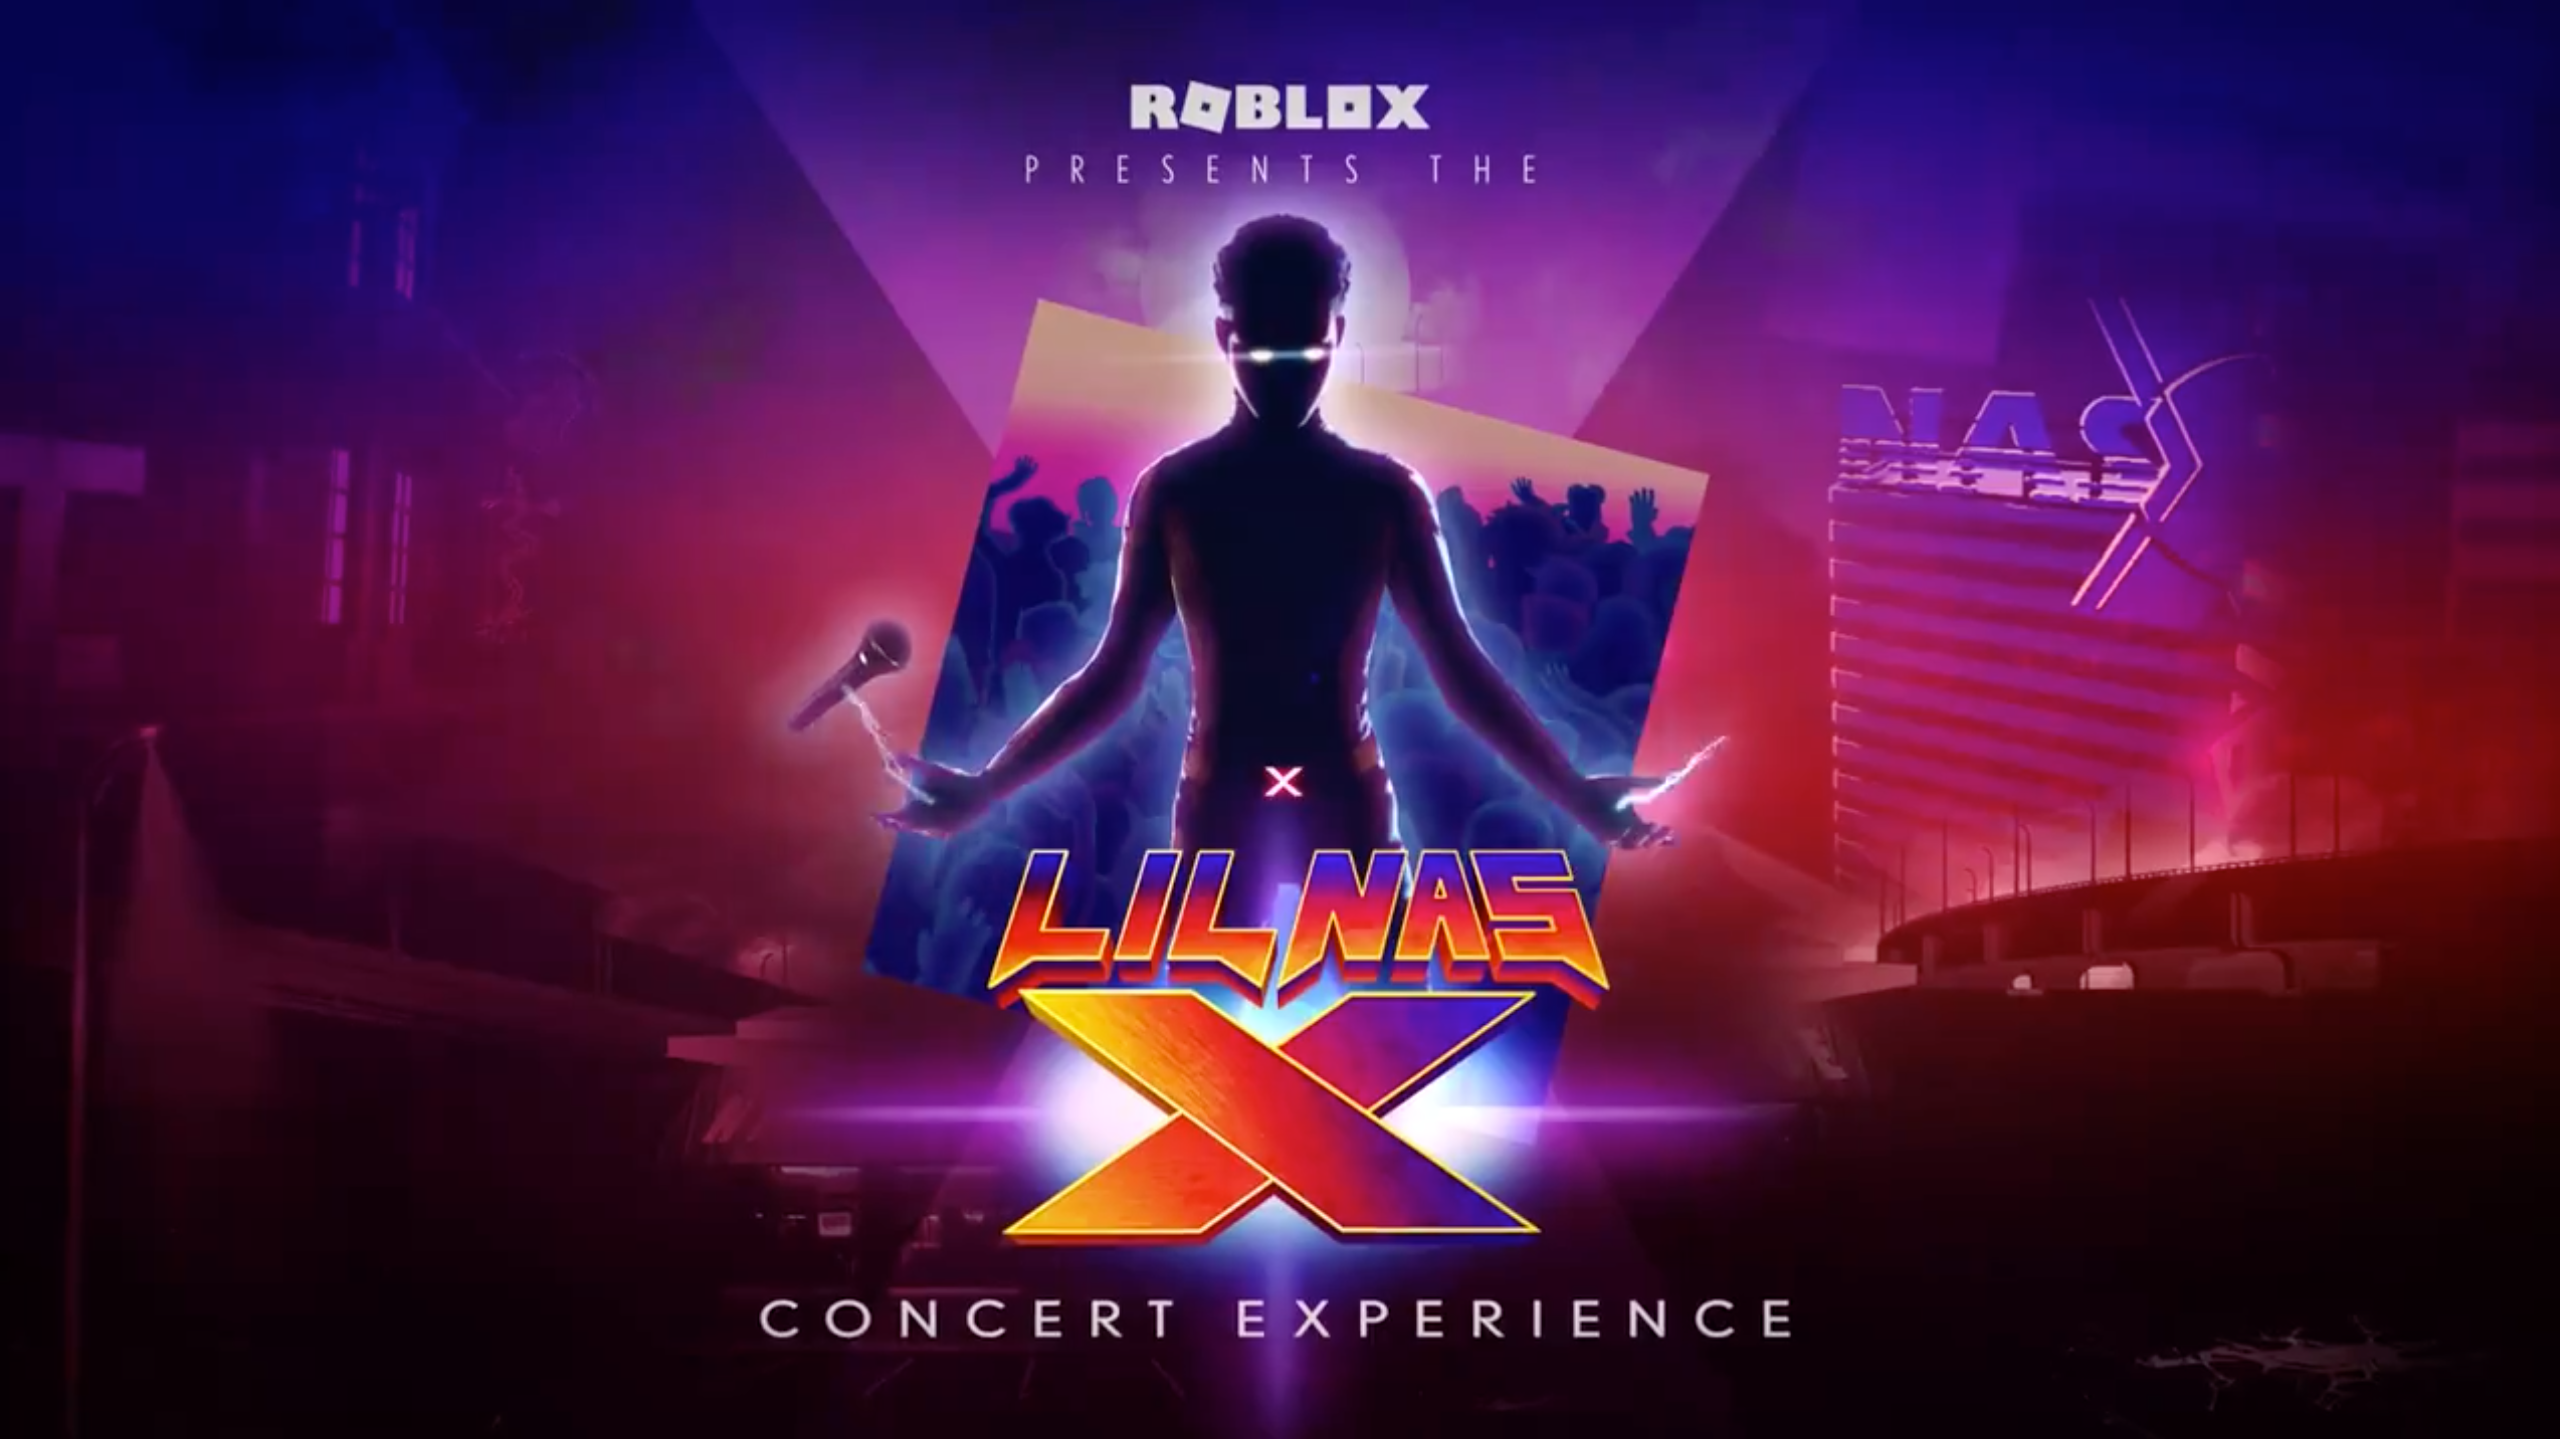 Lil Nas X Holding A Roblox Concert To Promote His New Song